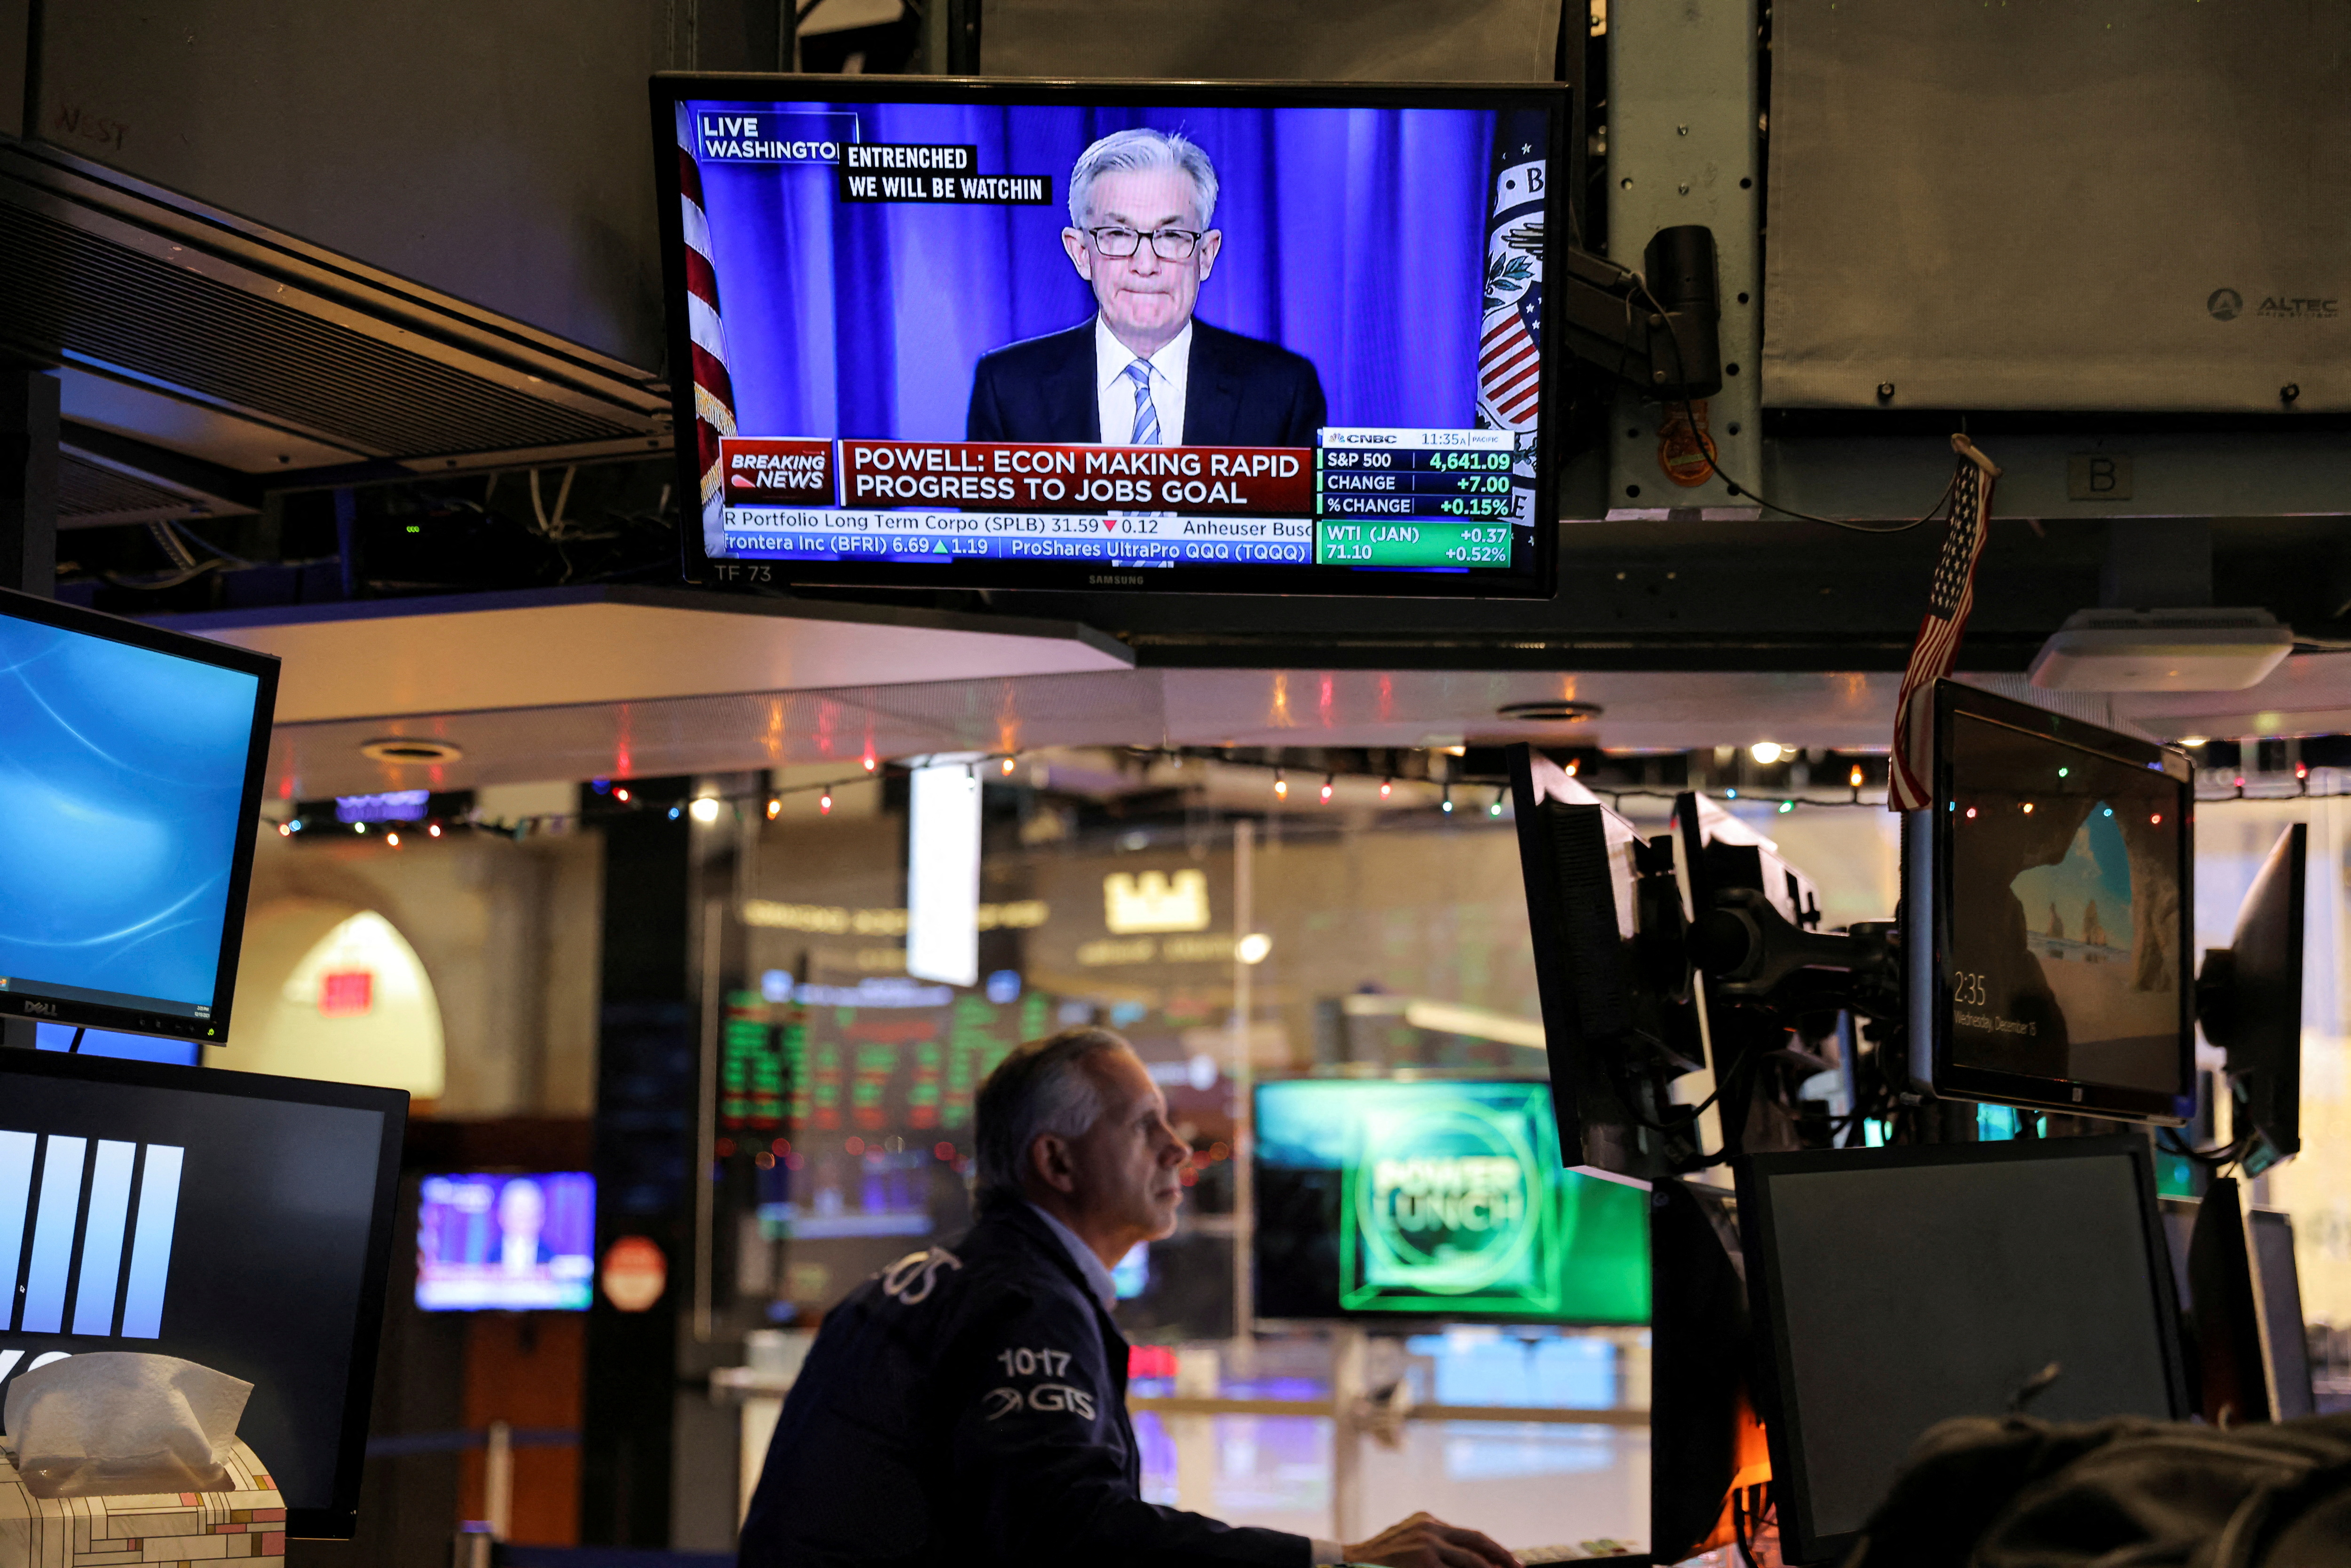 Federal Reserve Chair Jerome Powell is seen delivering remarks on a screen as a trader works on the trading floor at the New York Stock Exchange (NYSE) in Manhattan, New York City, U.S., December 15, 2021. REUTERS/Andrew Kelly/File Photo